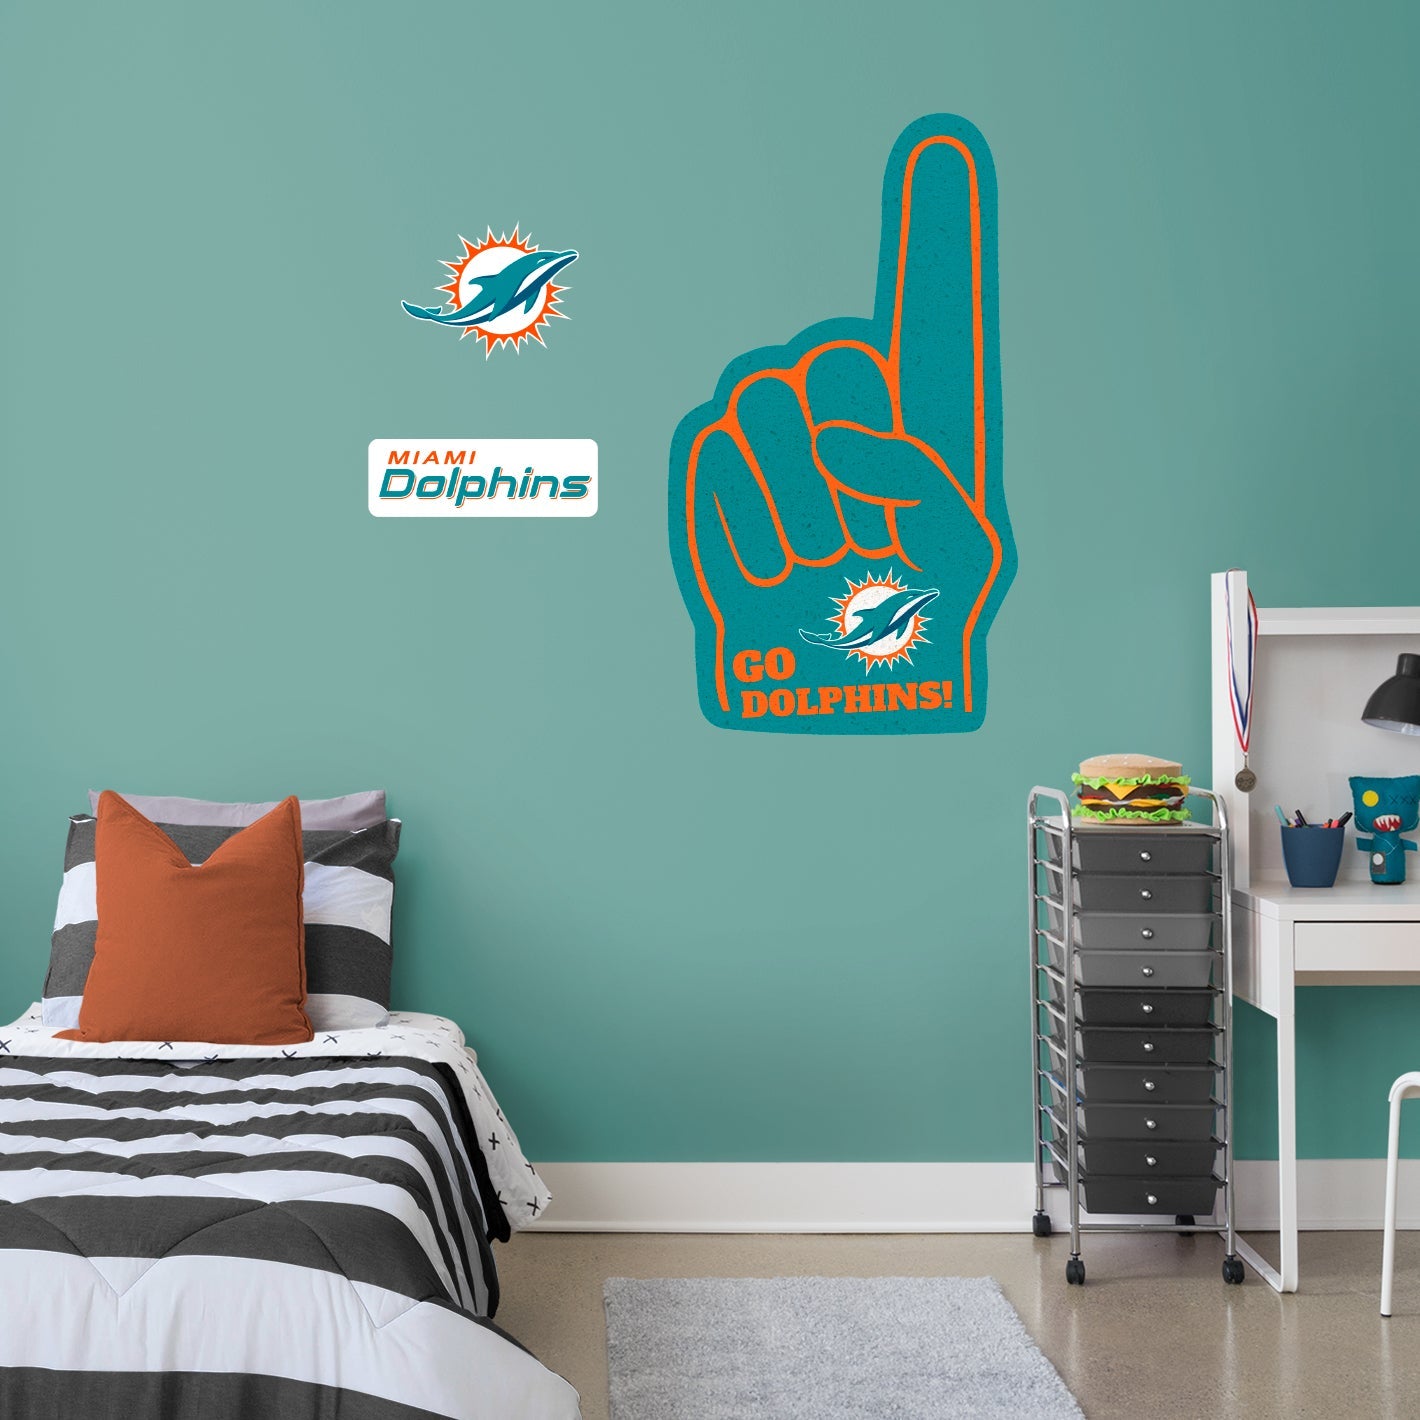 Miami Dolphins: Foam Finger - Officially Licensed NFL Removable Adhesive Decal